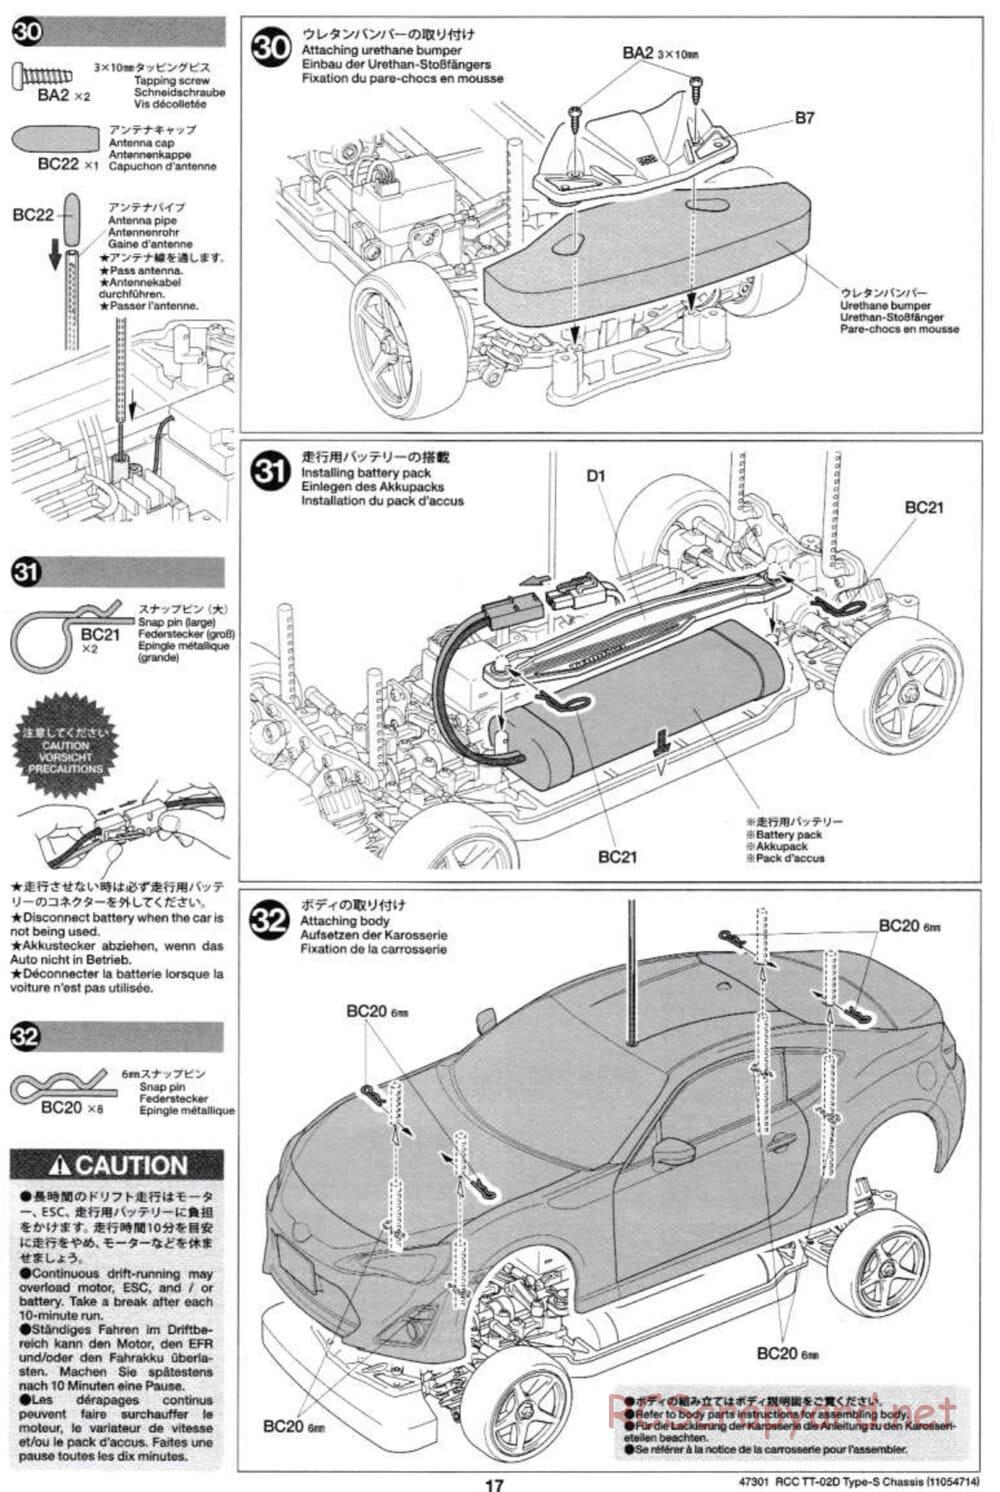 Tamiya - TT-02D Type-S Chassis - Manual - Page 17